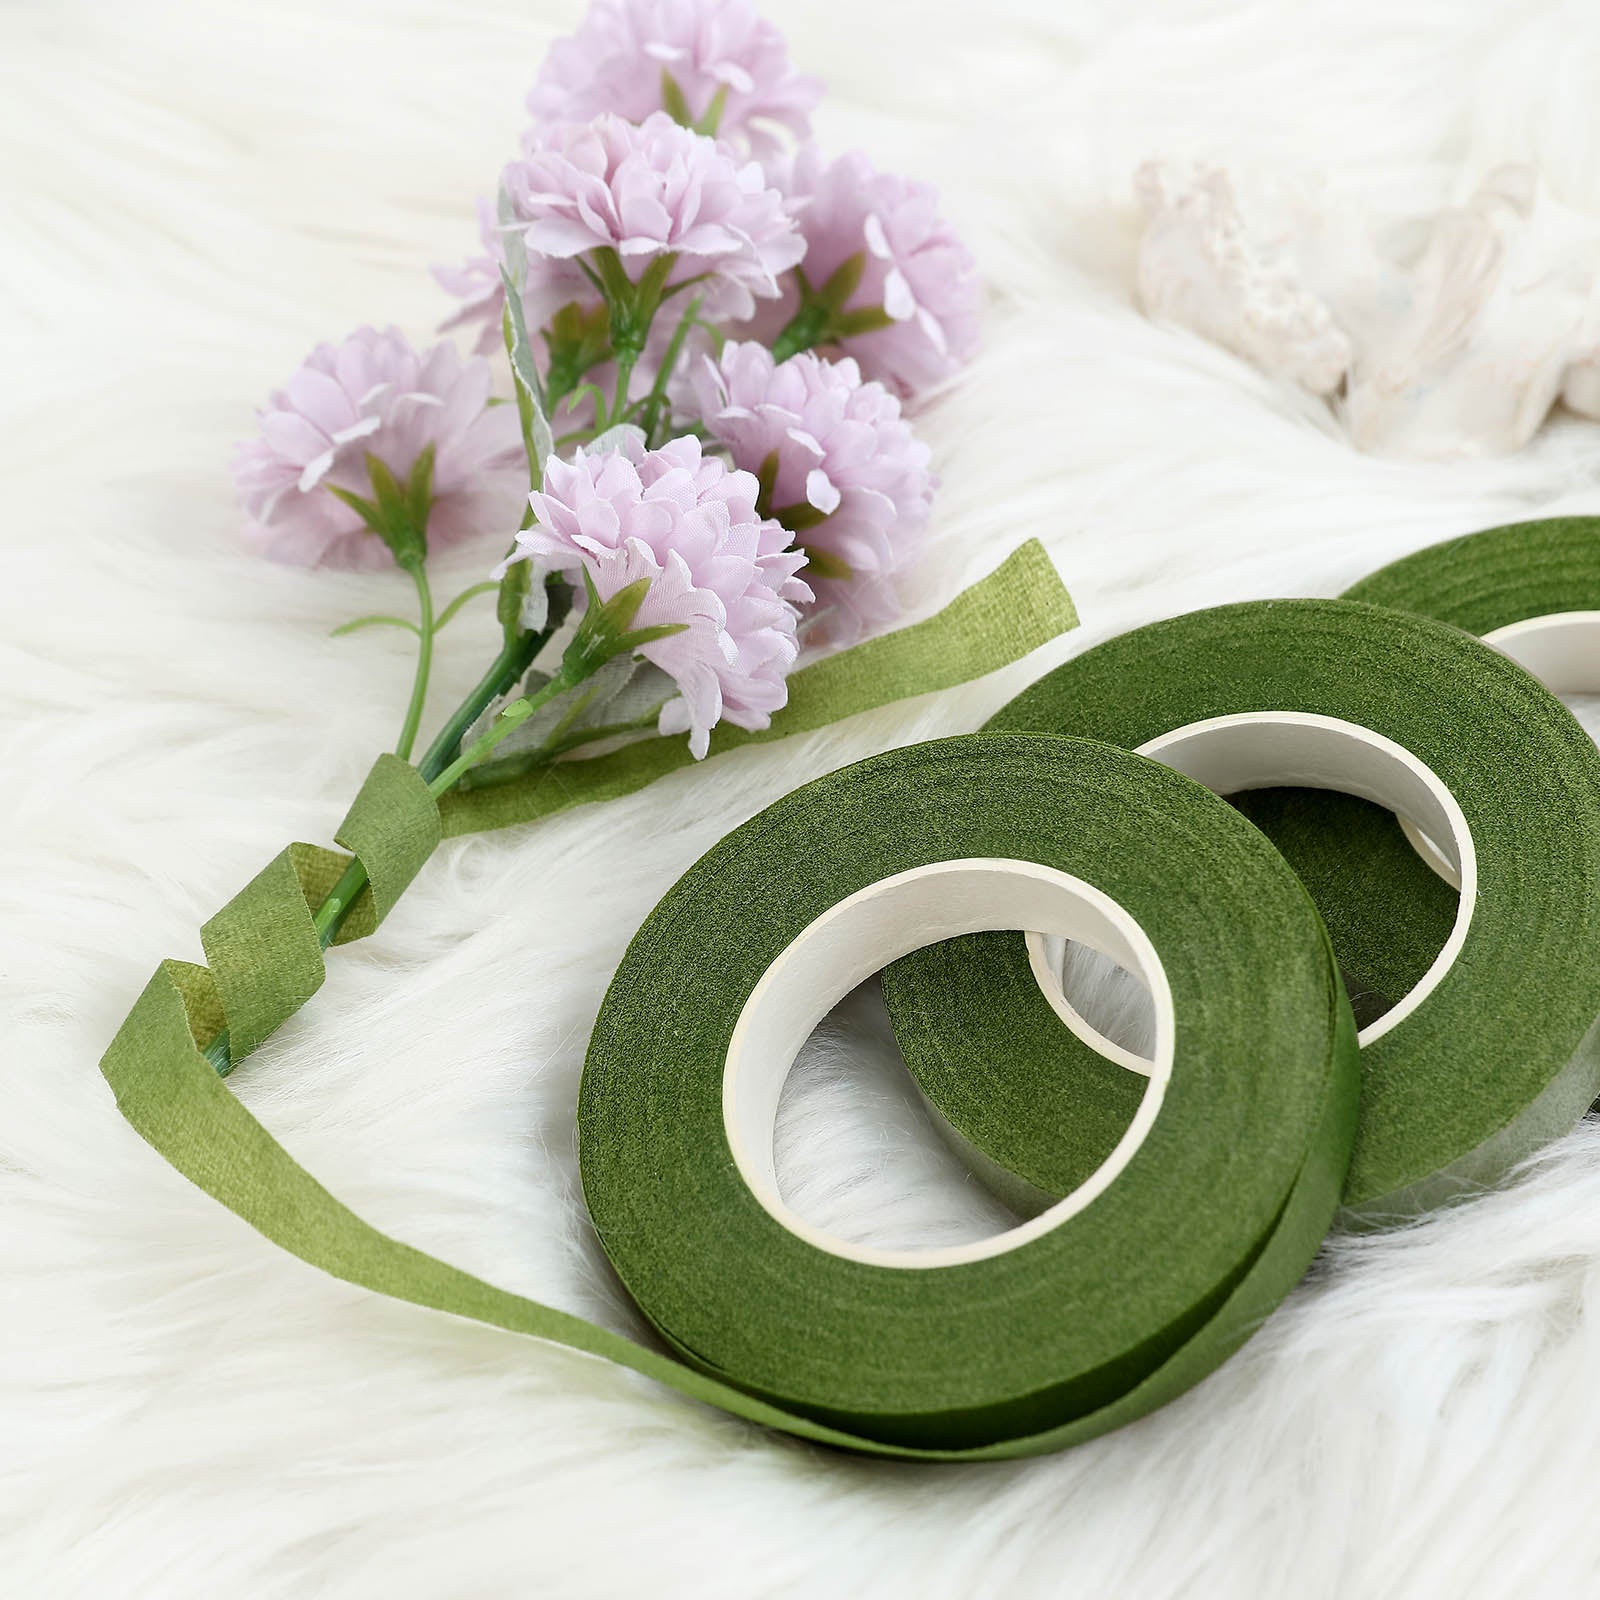 12 Pcs Floral Tape Florist Stem Wrap Green Tape for Bouquet Flowers and  Crafts Making